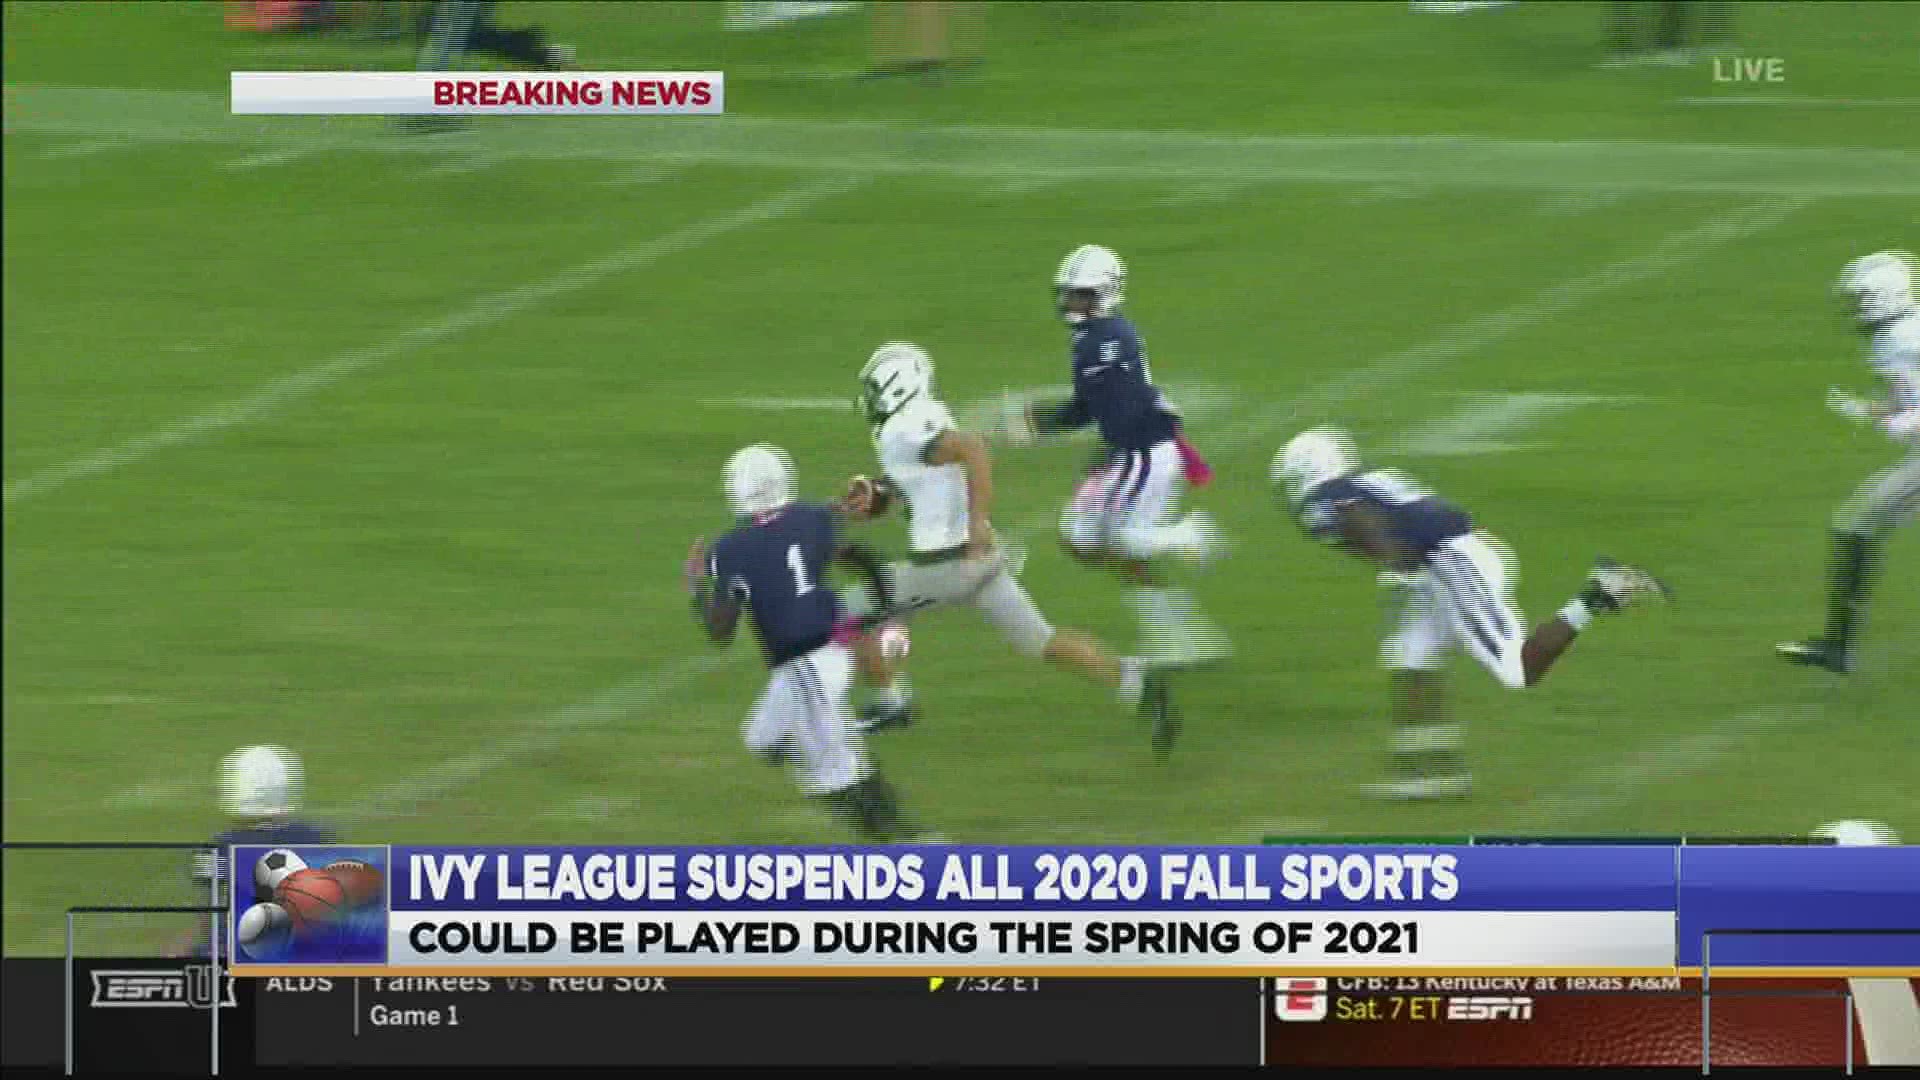 The Ivy League has decided to suspend all sports programs that would be played during the 2020 fall semester. Sports could resume in the spring of 2021.